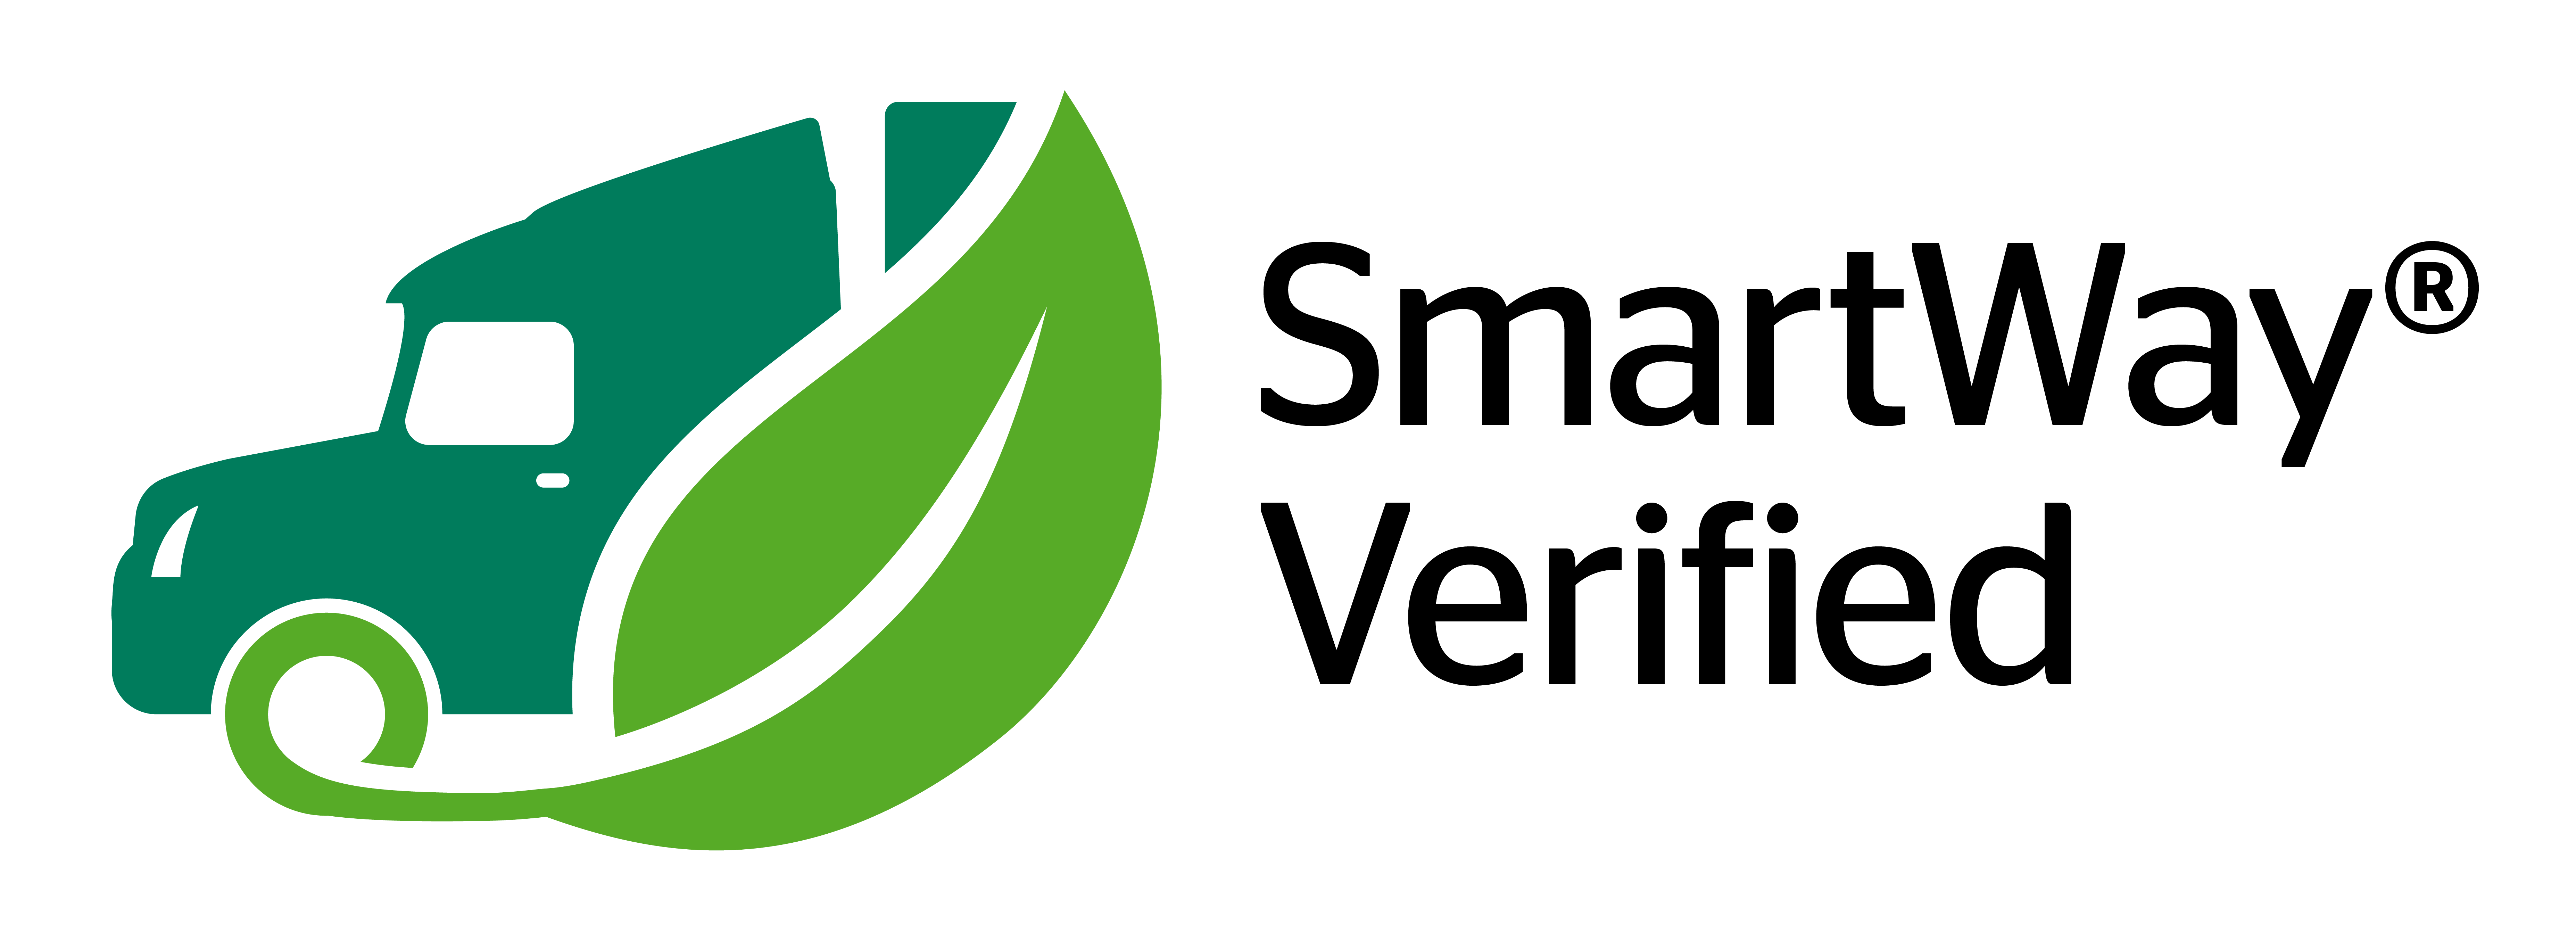 An image of Continental Truck and Bus Tires' Smartway-verified logo indicating the U.S. EPA has determined these tires can save 3% or more on fuel when used on all three axles compared to the best selling new tires for line haul trucks.